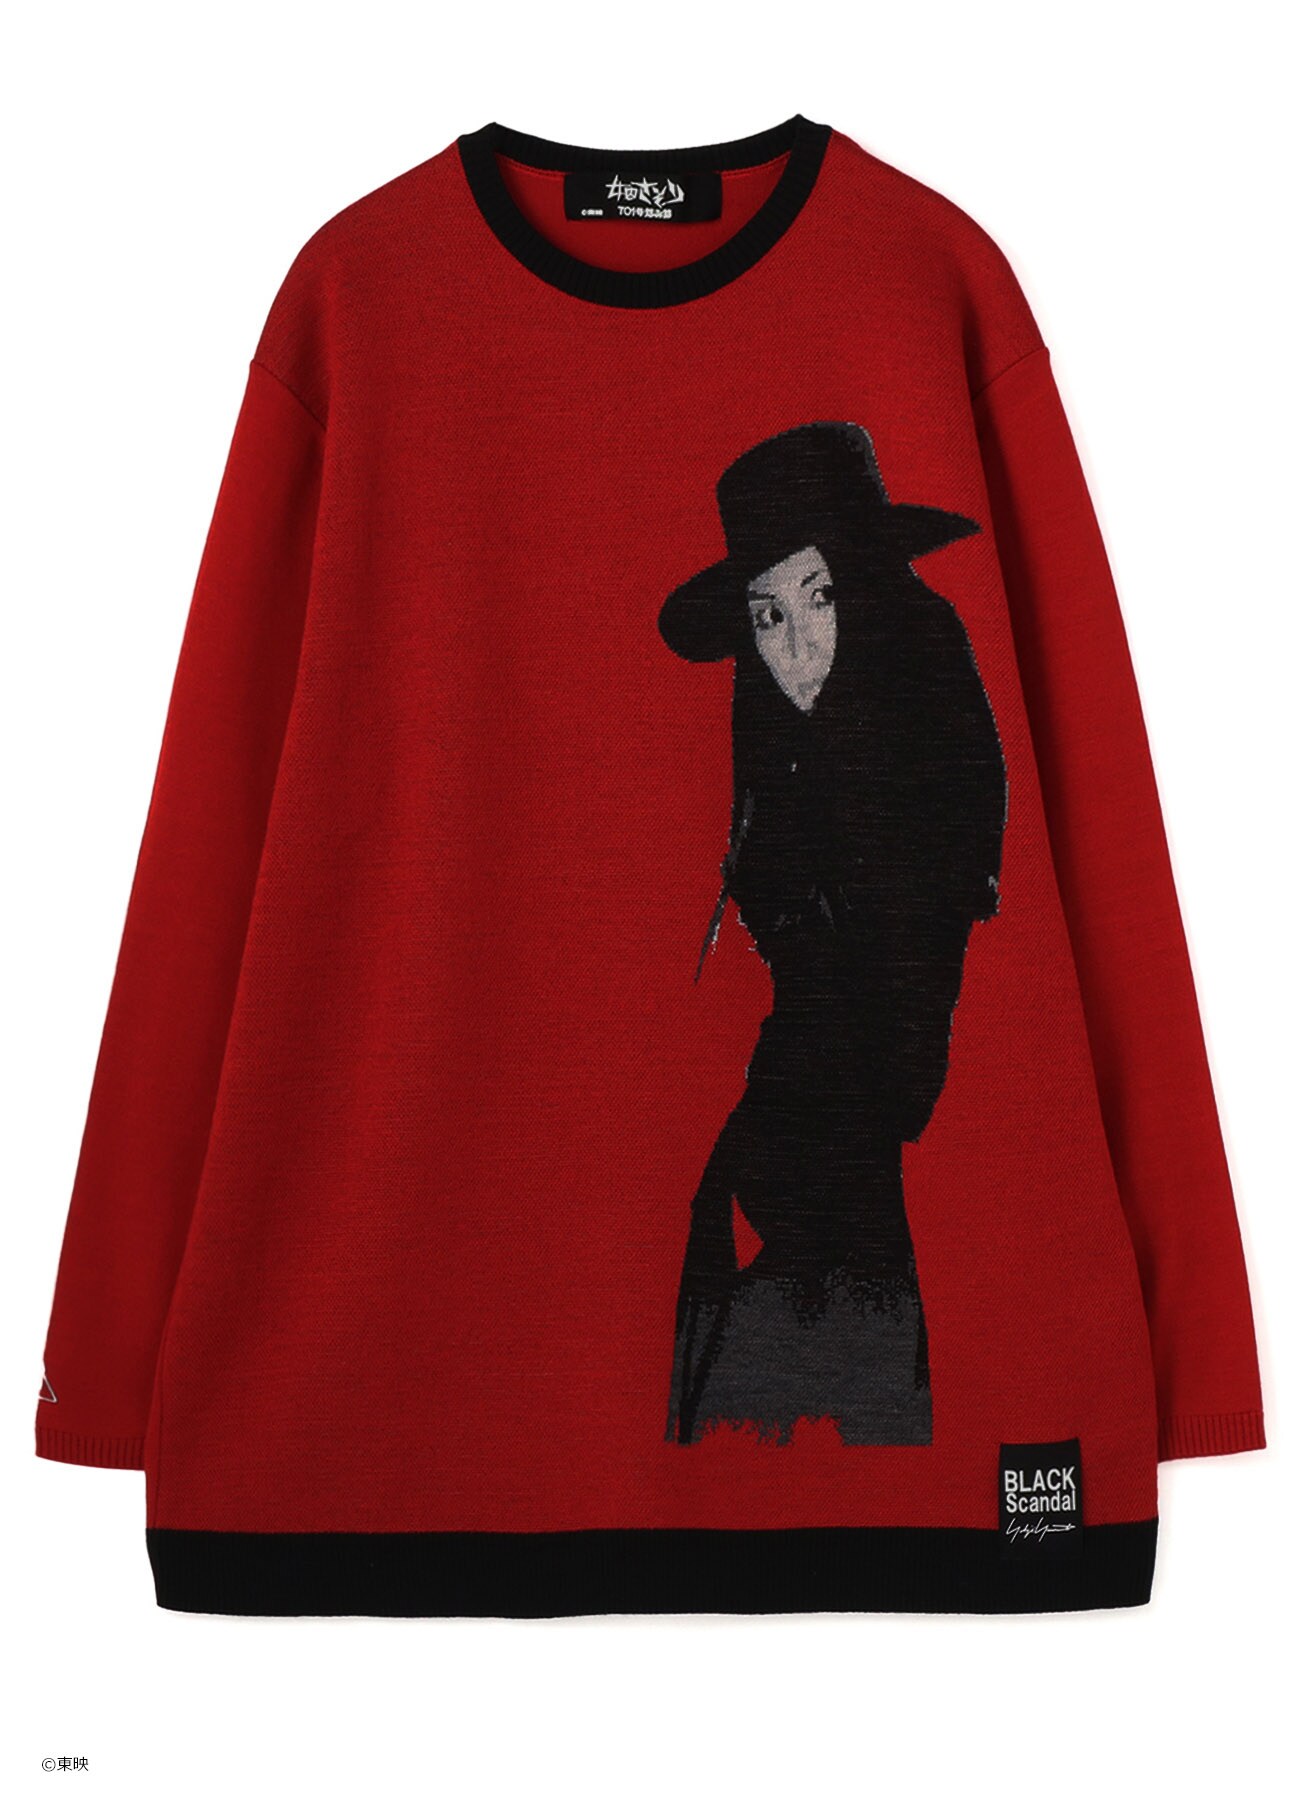 【5/24 10:00(JST) Release】FEMALE CONVICT: 701 SCORPION GRUDGE SONG CREW NECK KNIT